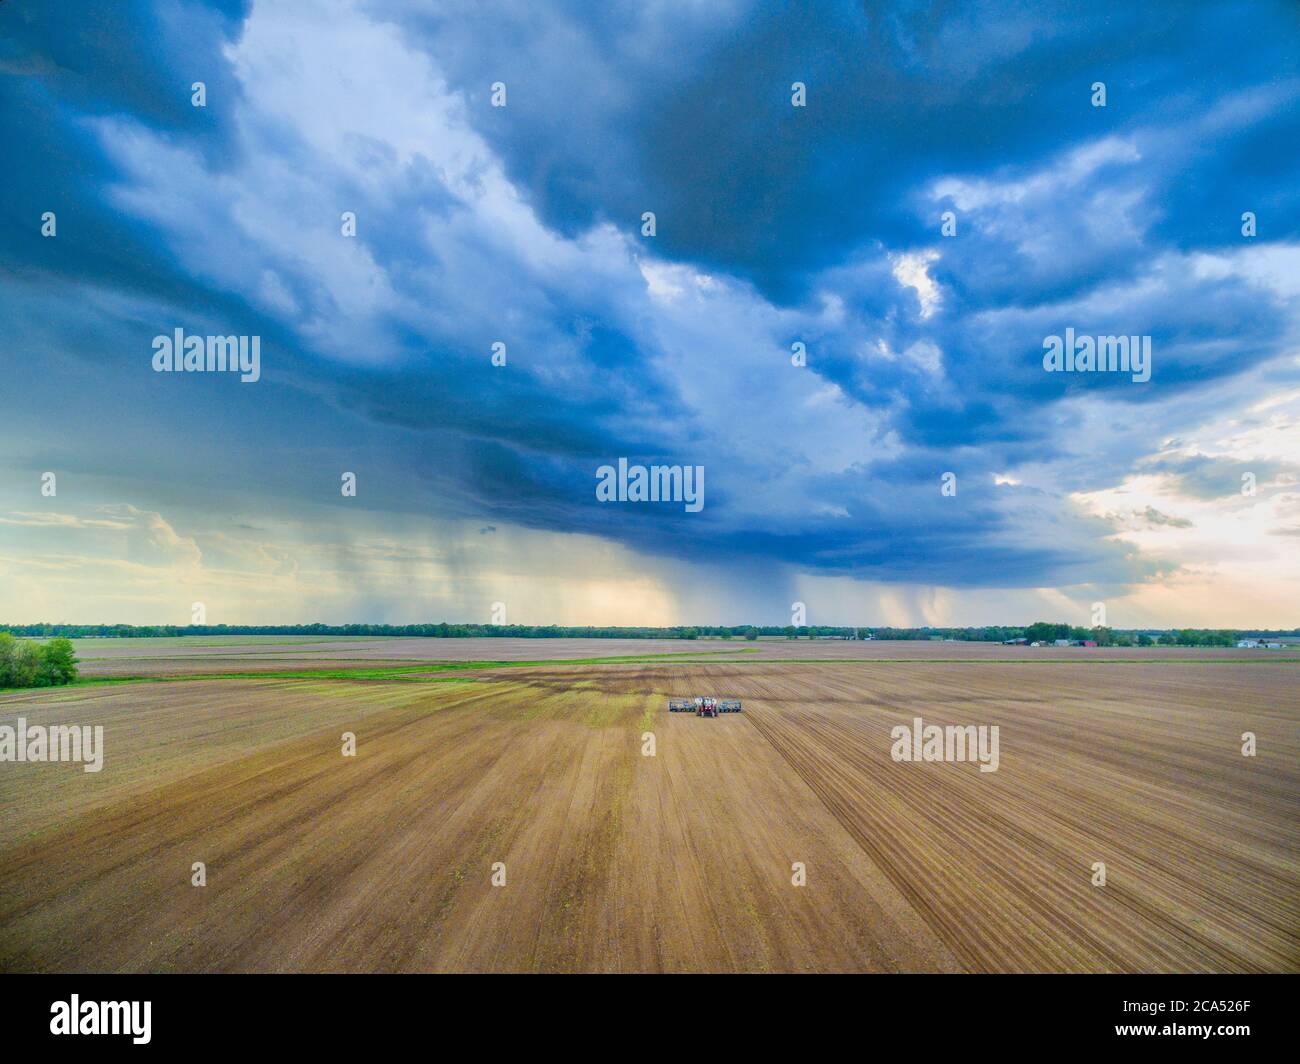 View of thunderstorm over field Marion Co., Illinois, USA Stock Photo